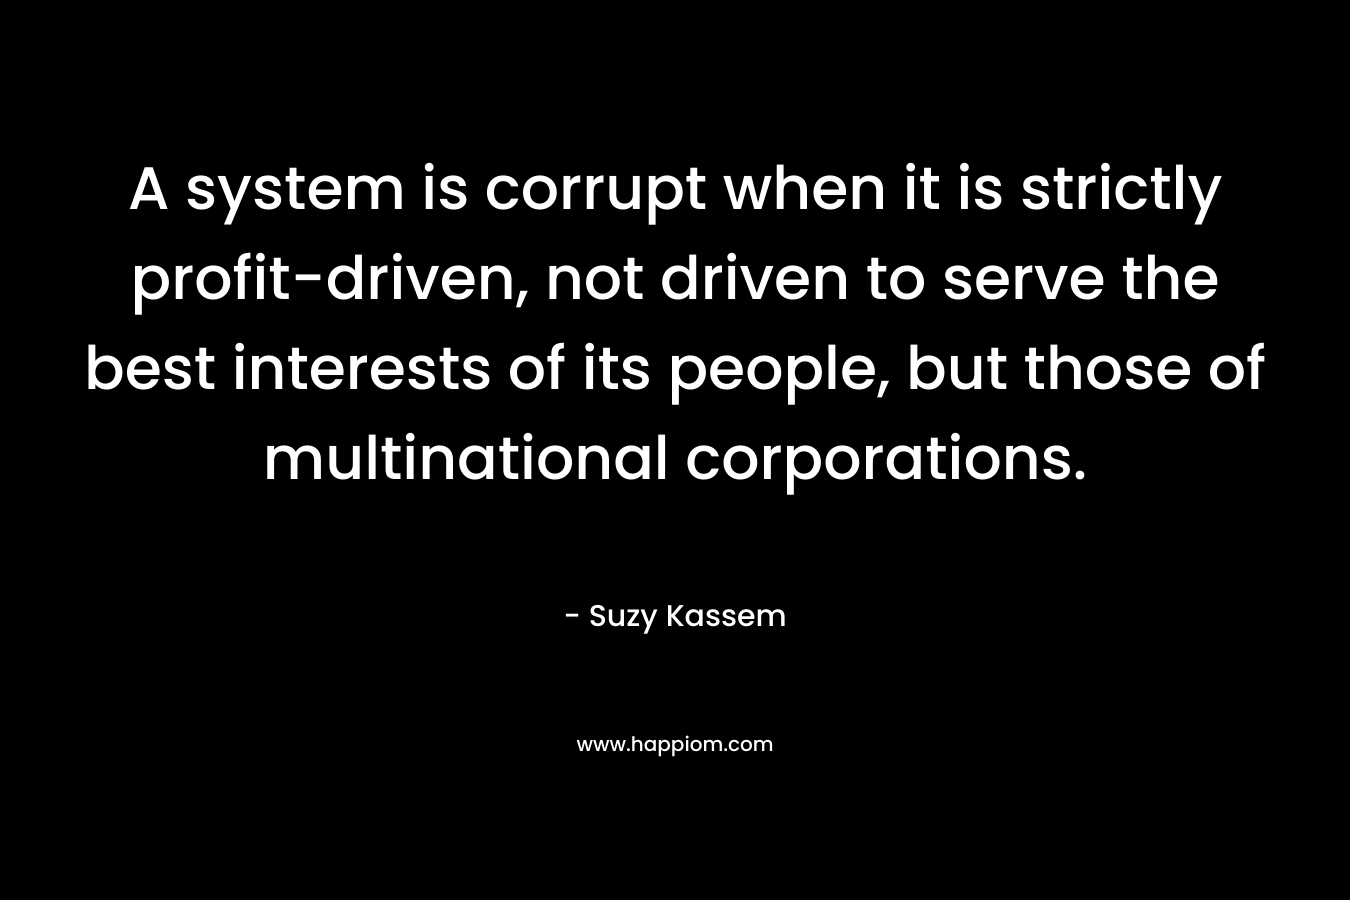 A system is corrupt when it is strictly profit-driven, not driven to serve the best interests of its people, but those of multinational corporations.